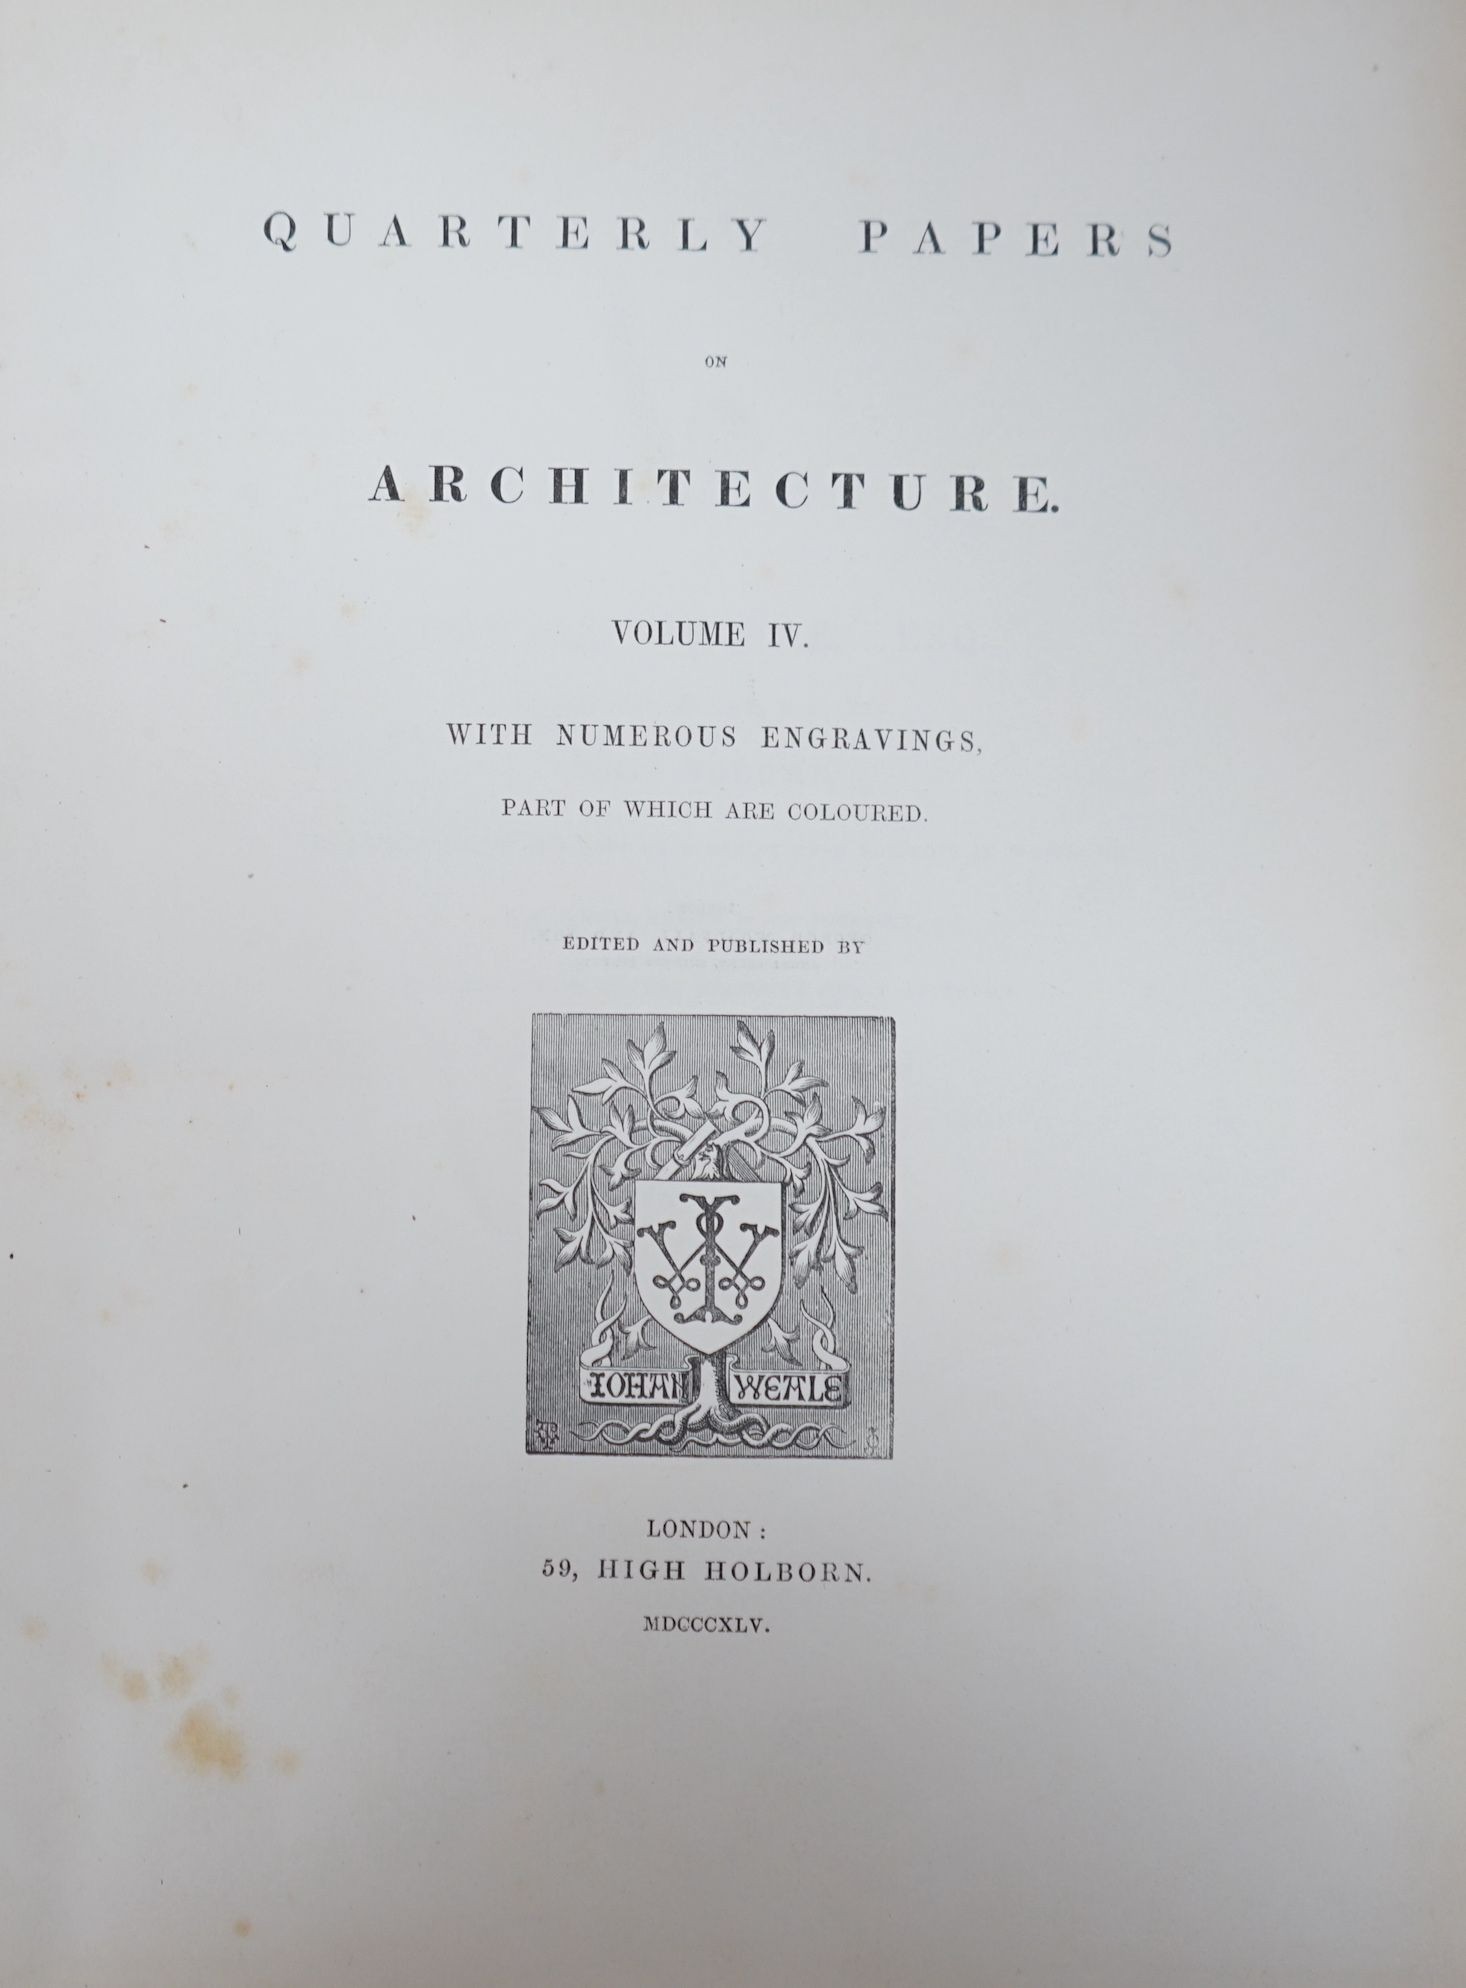 Weale (John, Editor and Publisher), Quarterly Papers on Architecture, Vols I-IV